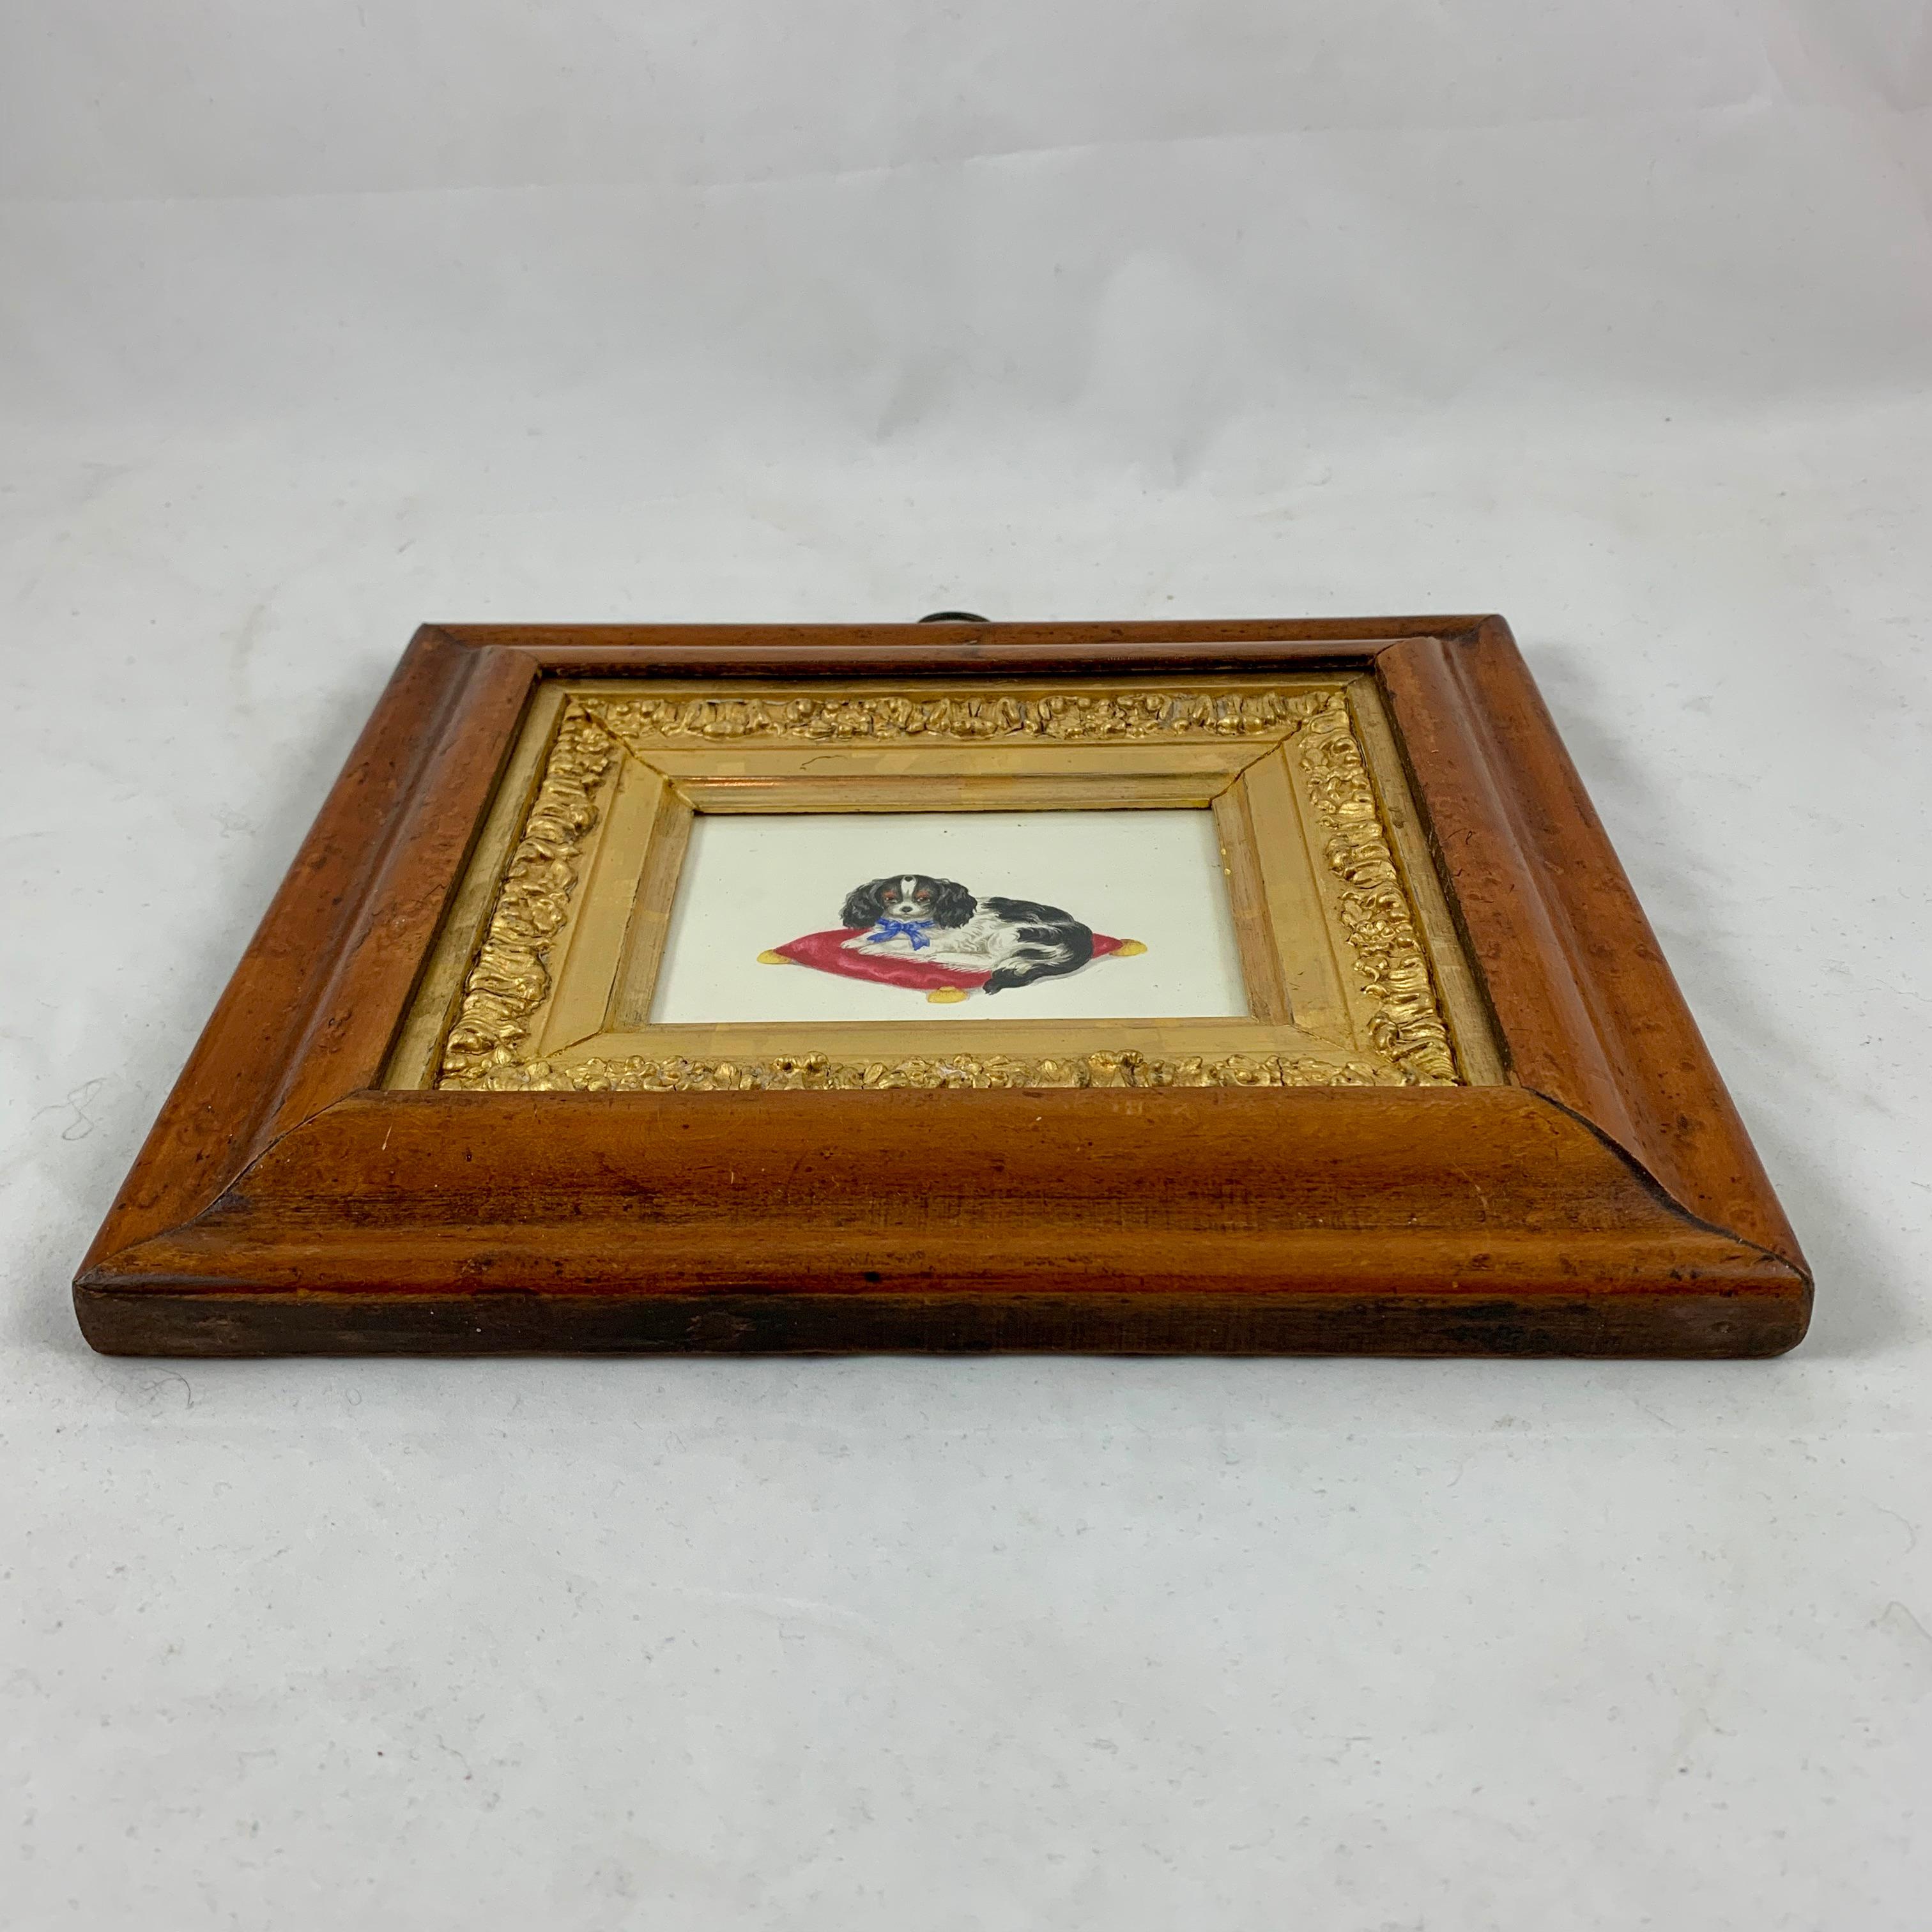 18th Century English Regency Period Fruitwood Framed Watercolor, A King Charles Spaniel